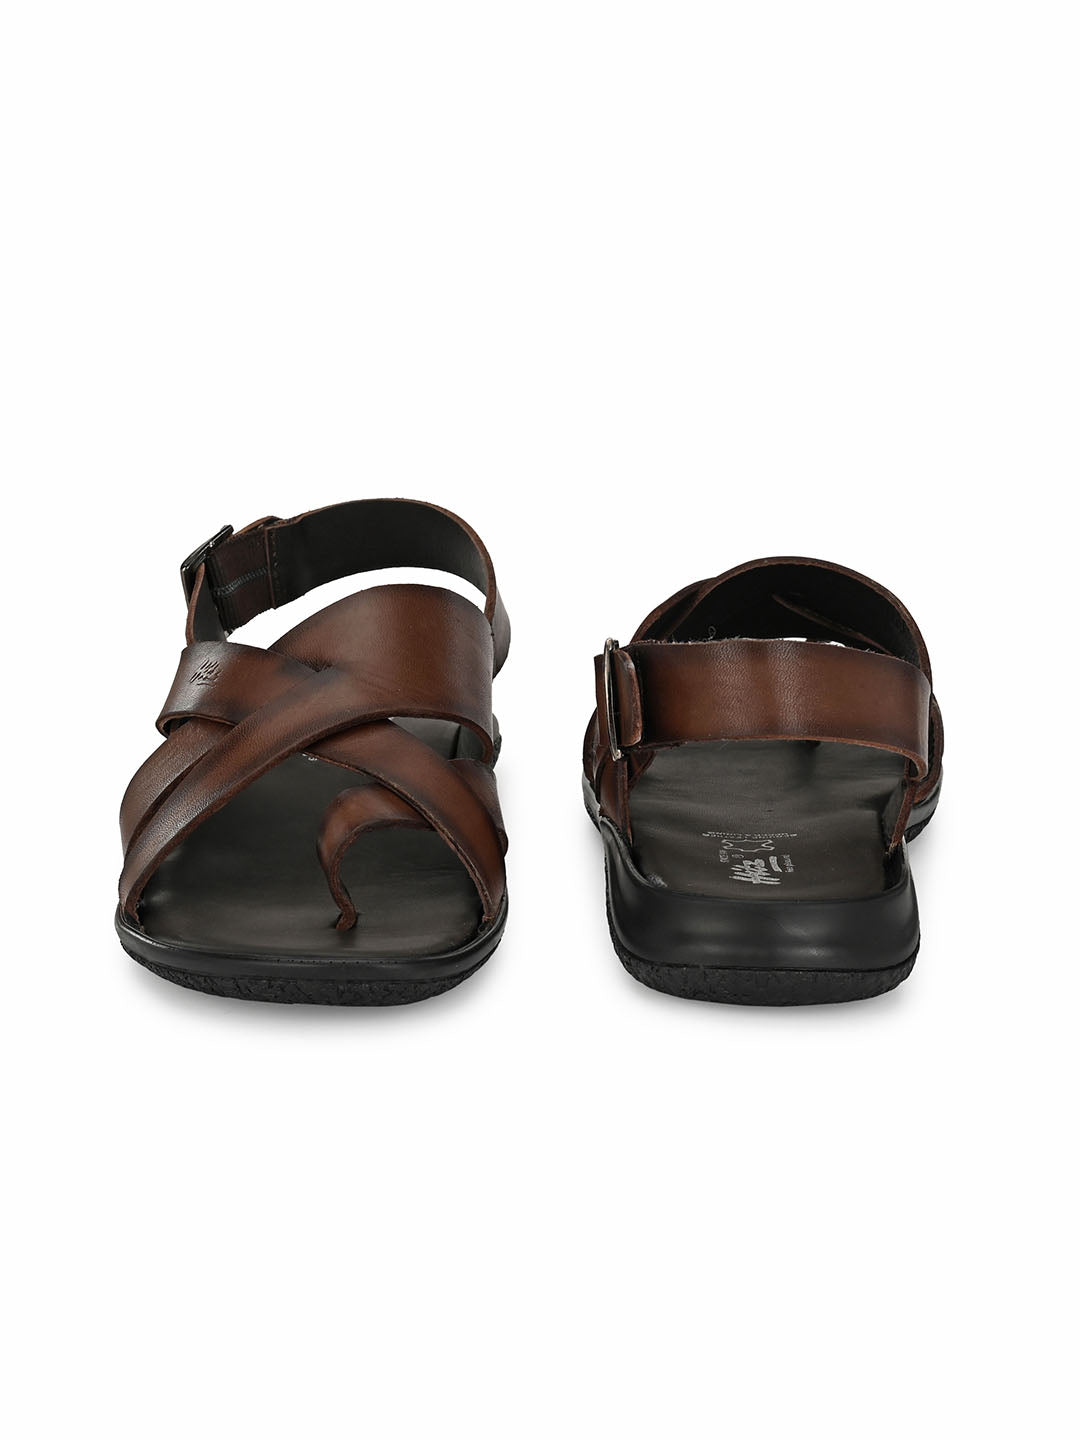 Men Sexy Leather Sandals, Toe Ring, Barefoot Style Ankle Strap Sandals -  DREAM : Handmade Products - Amazon.com